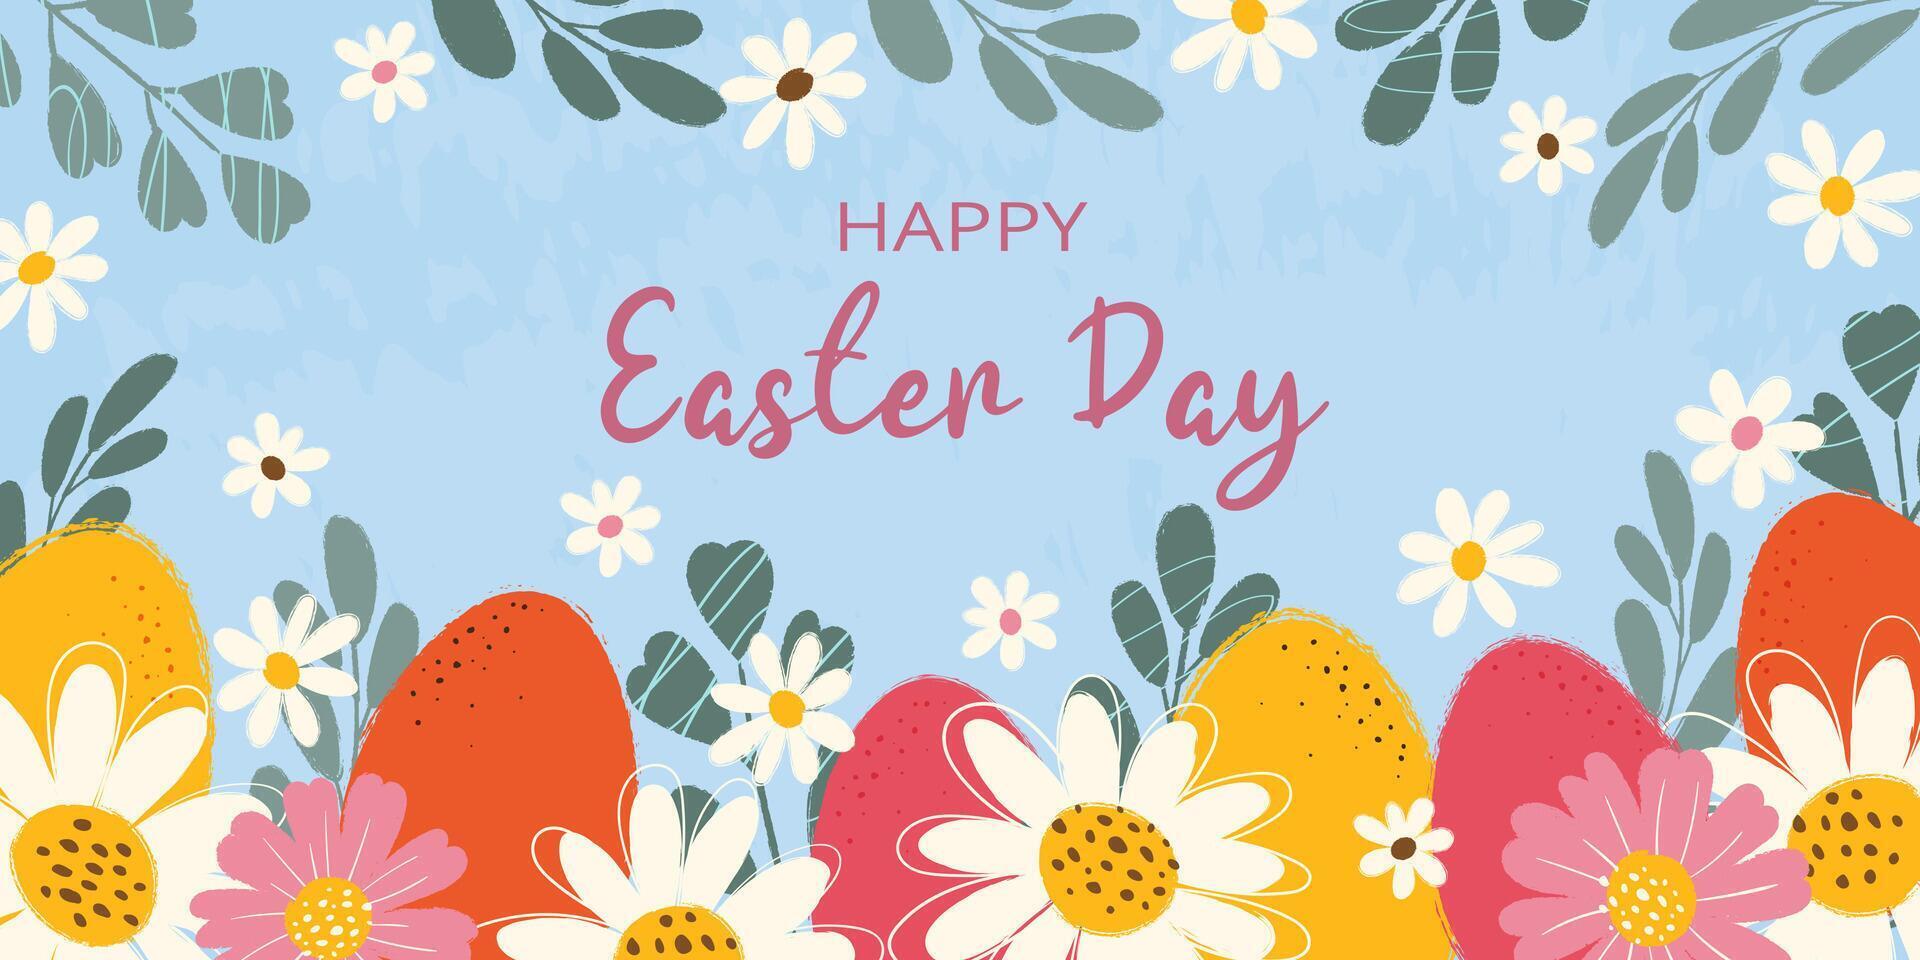 Horizontal greeting background decorated hand drawn blooming flowers, leaves, colorful eggs and typography Happy Easter Day. Flat vector grunge textured illustration on blue backdrop.